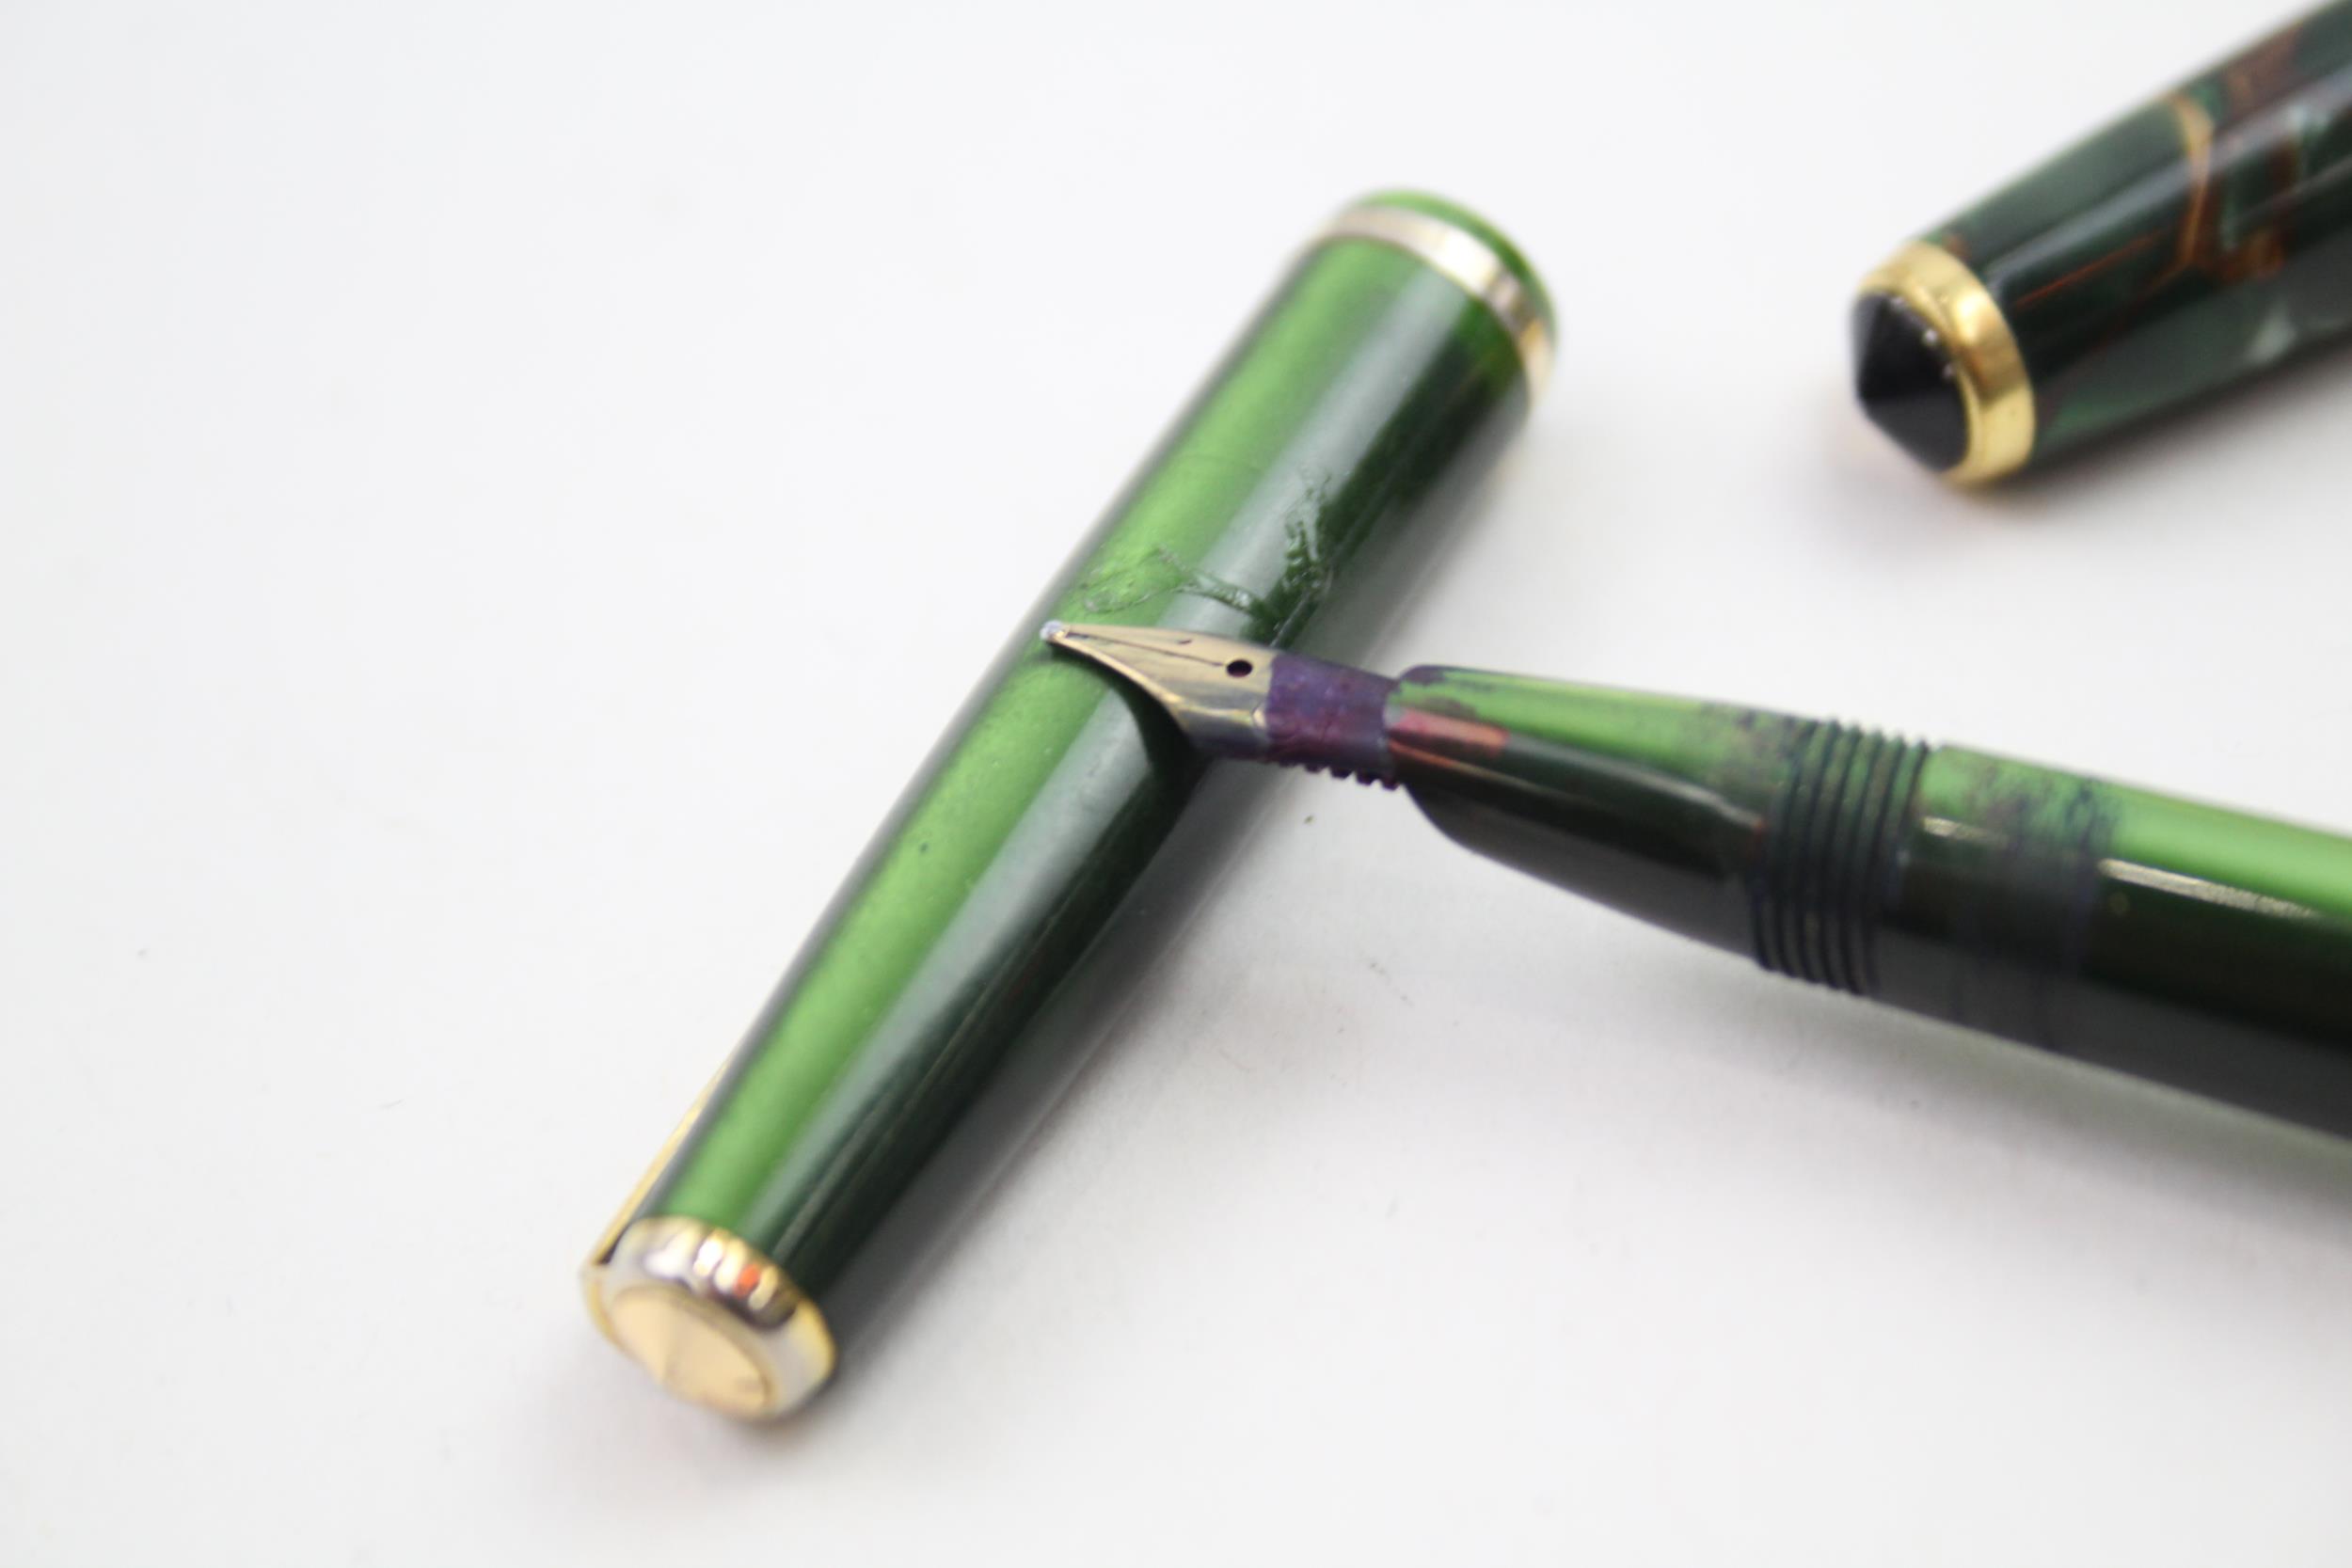 2 x Vintage CONWAY STEWART Fountain Pens w/ 14ct Gold Nibs WRITING Inc 570 - Inc 570, 12 Etc DIP - Image 2 of 6